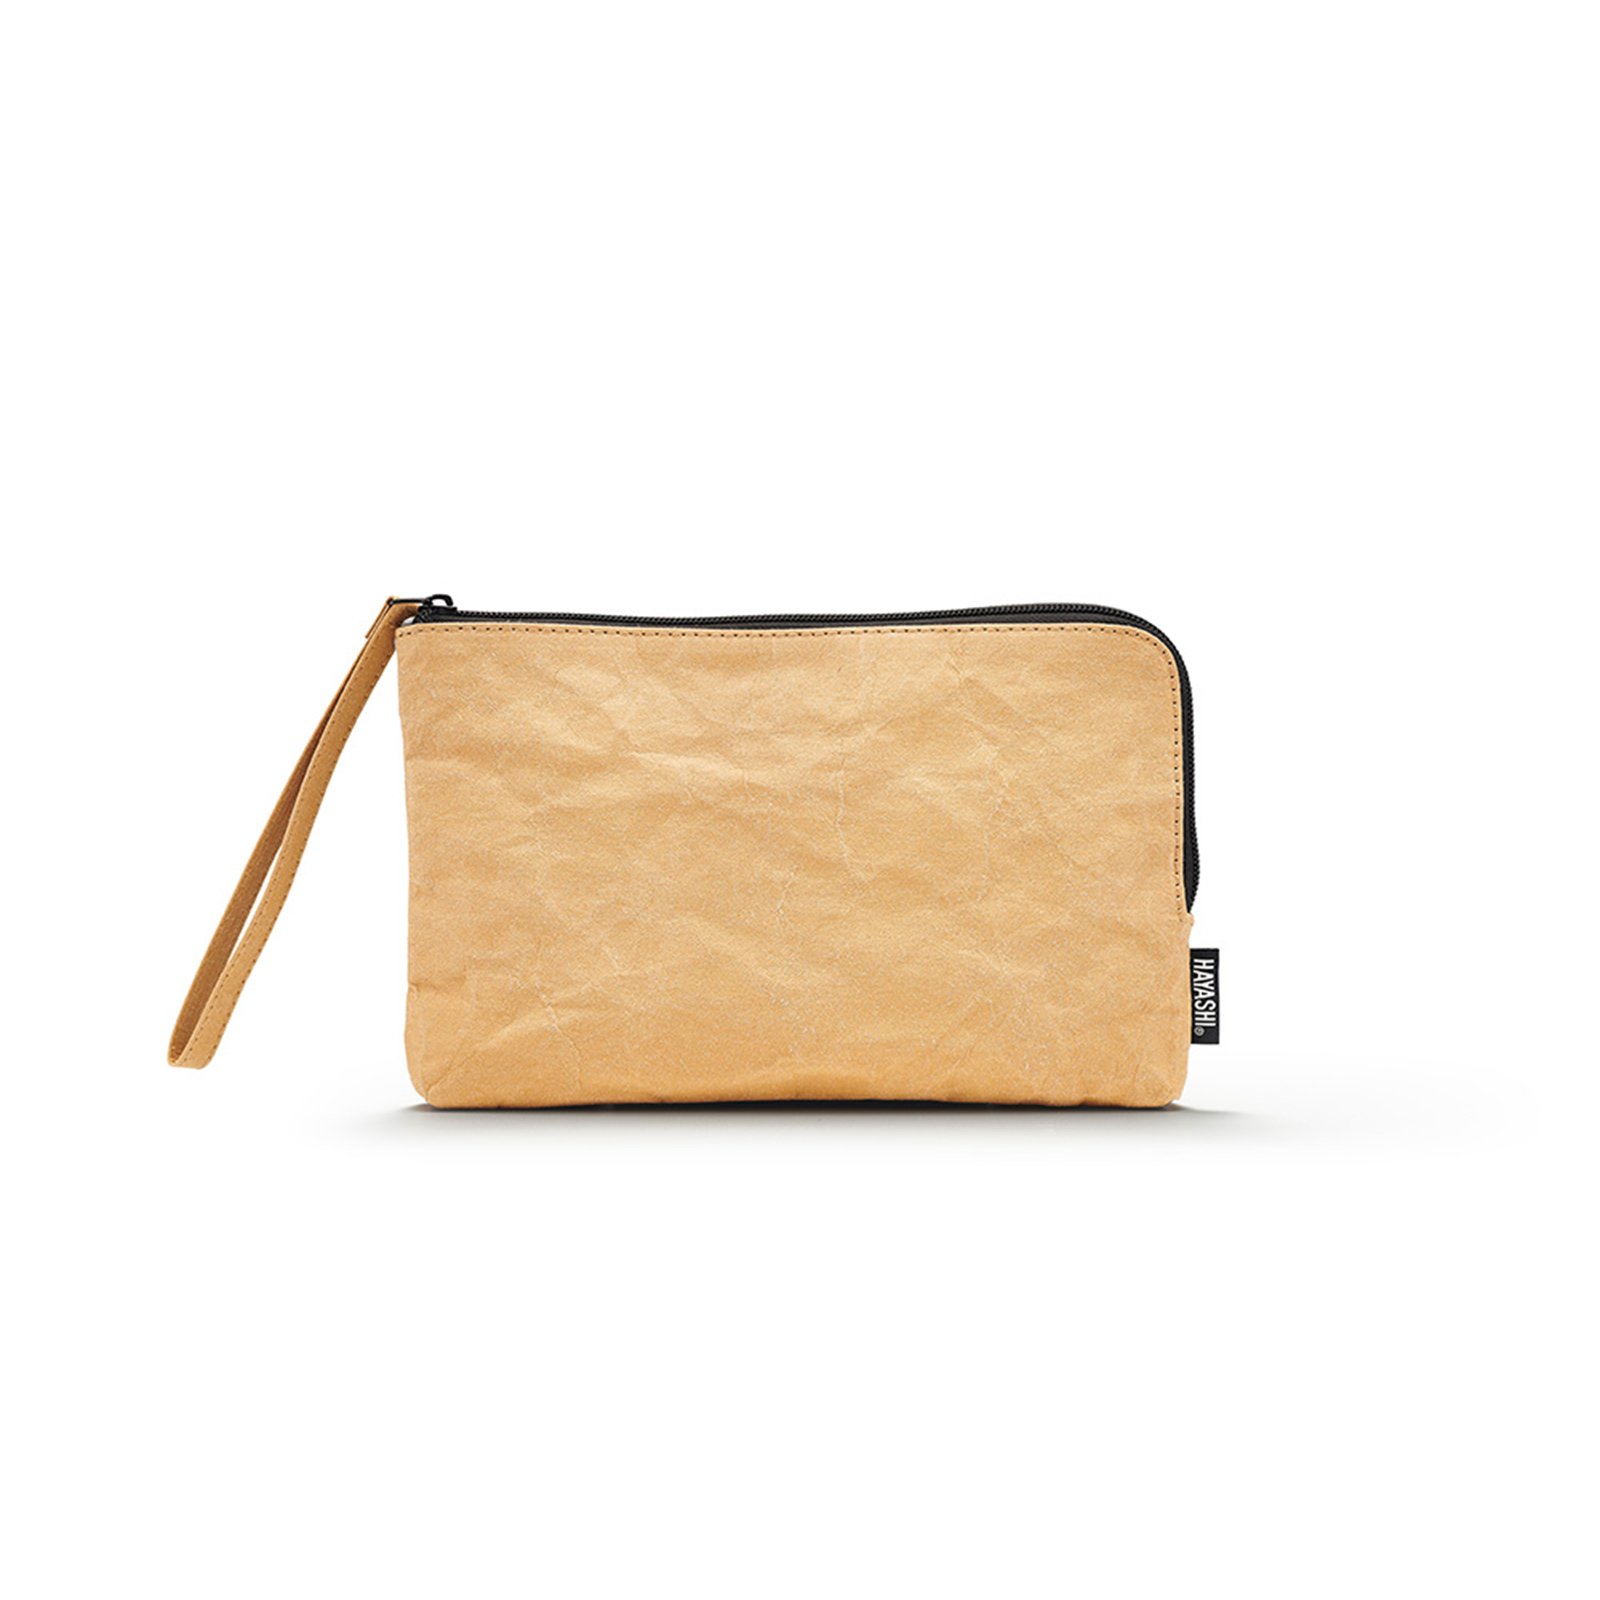 Vegan Paper Leather Tidy Pouch in Dust Colour